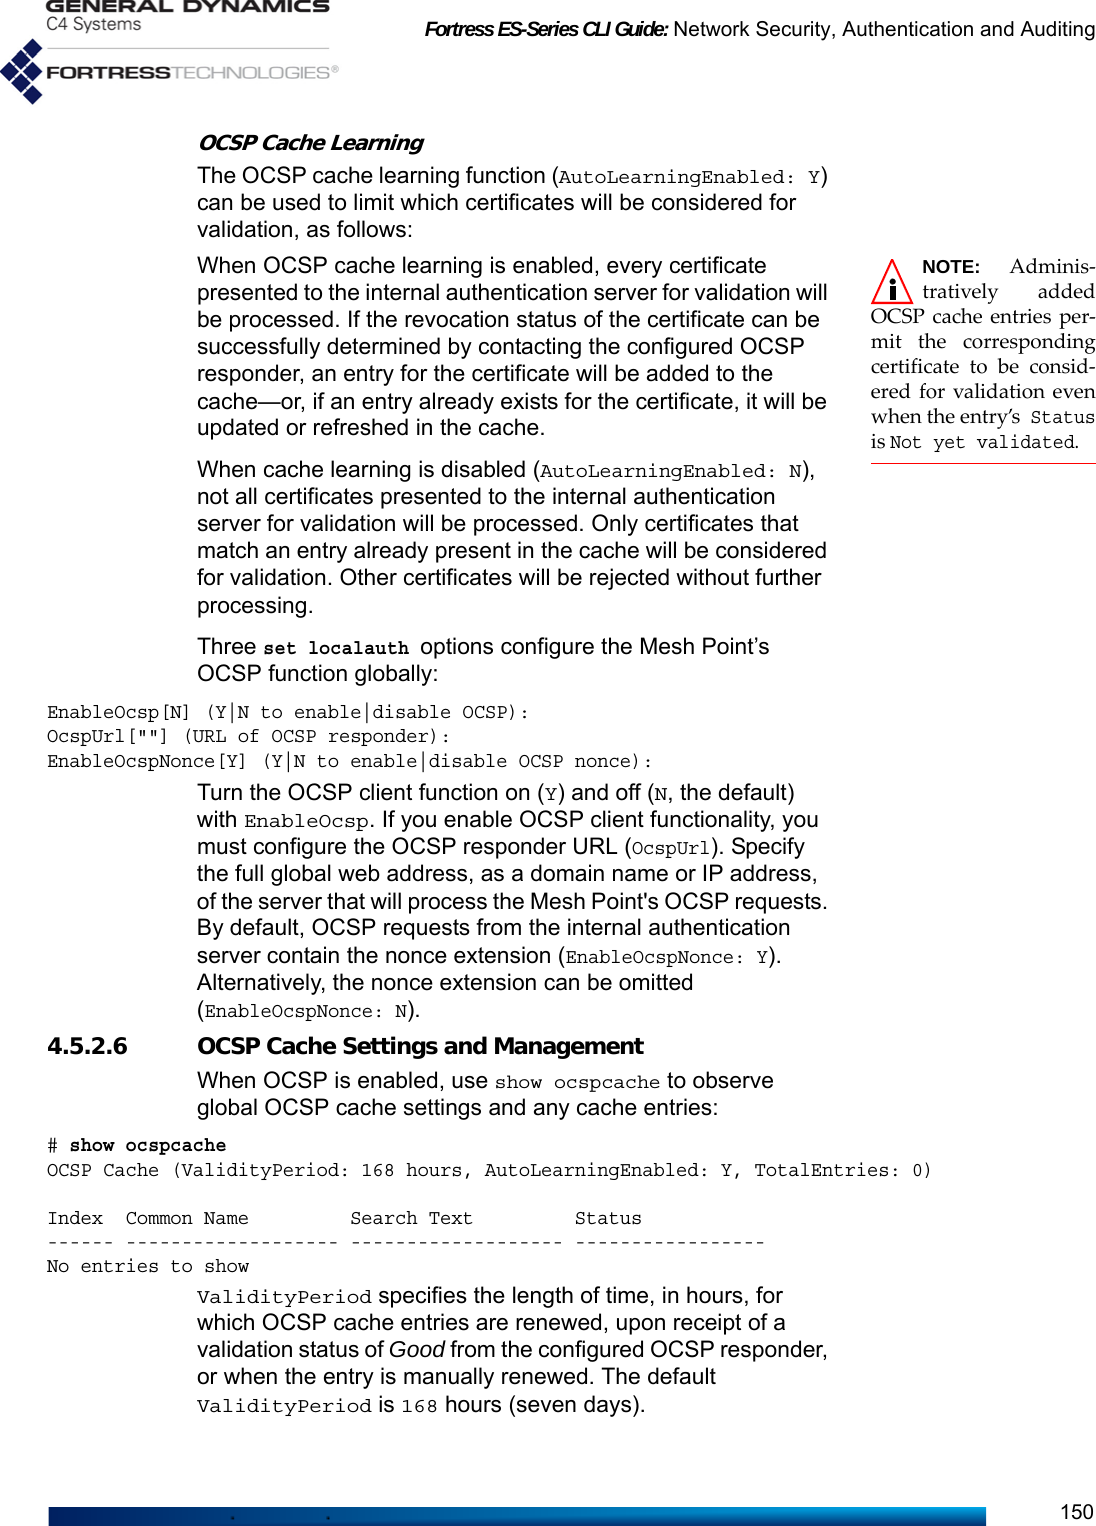 Fortress ES-Series CLI Guide: Network Security, Authentication and Auditing150OCSP Cache LearningThe OCSP cache learning function (AutoLearningEnabled: Y) can be used to limit which certificates will be considered for validation, as follows: NOTE: Adminis-tratively addedOCSP cache entries per-mit the correspondingcertificate to be consid-ered for validation evenwhen the entry’s Statusis Not yet validated. When OCSP cache learning is enabled, every certificate presented to the internal authentication server for validation will be processed. If the revocation status of the certificate can be successfully determined by contacting the configured OCSP responder, an entry for the certificate will be added to the cache—or, if an entry already exists for the certificate, it will be updated or refreshed in the cache.When cache learning is disabled (AutoLearningEnabled: N), not all certificates presented to the internal authentication server for validation will be processed. Only certificates that match an entry already present in the cache will be considered for validation. Other certificates will be rejected without further processing.Three set localauth options configure the Mesh Point’s OCSP function globally:EnableOcsp[N] (Y|N to enable|disable OCSP):OcspUrl[&quot;&quot;] (URL of OCSP responder):EnableOcspNonce[Y] (Y|N to enable|disable OCSP nonce):Turn the OCSP client function on (Y) and off (N, the default) with EnableOcsp. If you enable OCSP client functionality, you must configure the OCSP responder URL (OcspUrl). Specify the full global web address, as a domain name or IP address, of the server that will process the Mesh Point&apos;s OCSP requests. By default, OCSP requests from the internal authentication server contain the nonce extension (EnableOcspNonce: Y). Alternatively, the nonce extension can be omitted (EnableOcspNonce: N).4.5.2.6 OCSP Cache Settings and ManagementWhen OCSP is enabled, use show ocspcache to observe global OCSP cache settings and any cache entries:# show ocspcacheOCSP Cache (ValidityPeriod: 168 hours, AutoLearningEnabled: Y, TotalEntries: 0)Index  Common Name         Search Text         Status------ ------------------- ------------------- -----------------No entries to showValidityPeriod specifies the length of time, in hours, for which OCSP cache entries are renewed, upon receipt of a validation status of Good from the configured OCSP responder, or when the entry is manually renewed. The default ValidityPeriod is 168 hours (seven days).